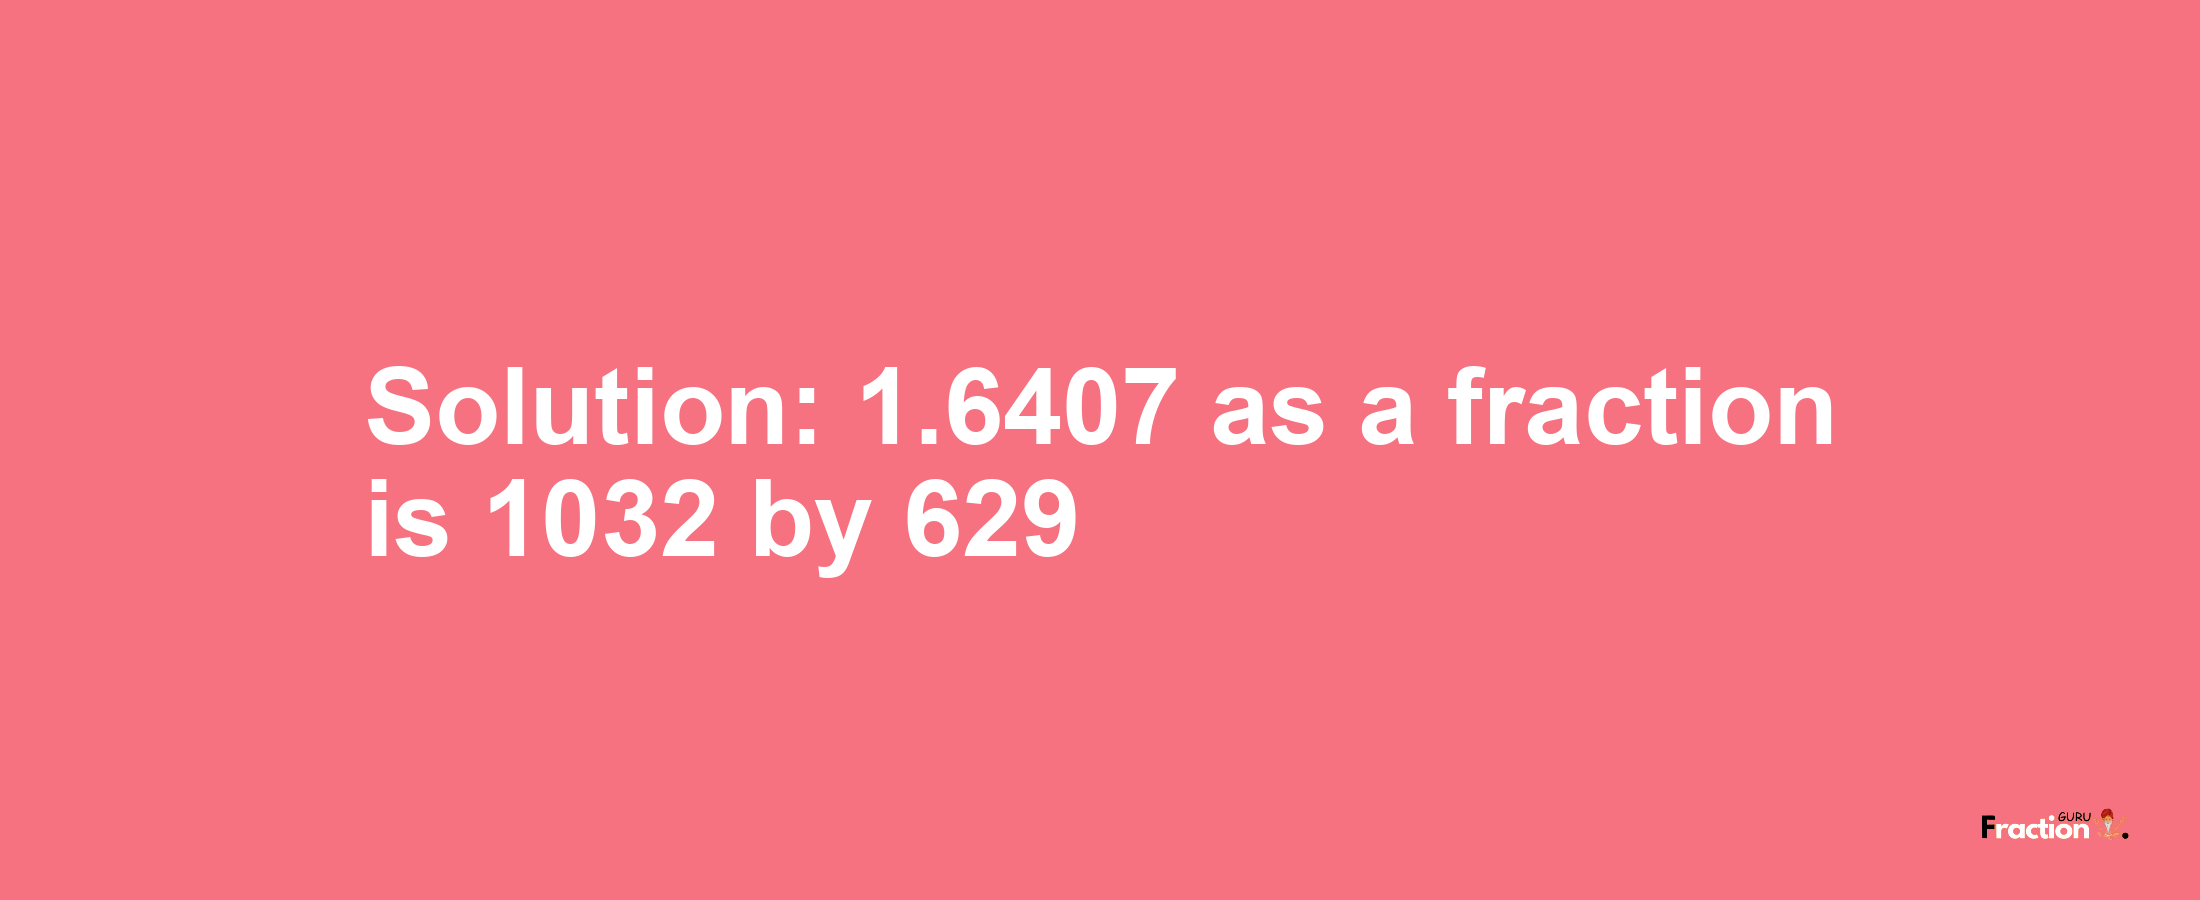 Solution:1.6407 as a fraction is 1032/629